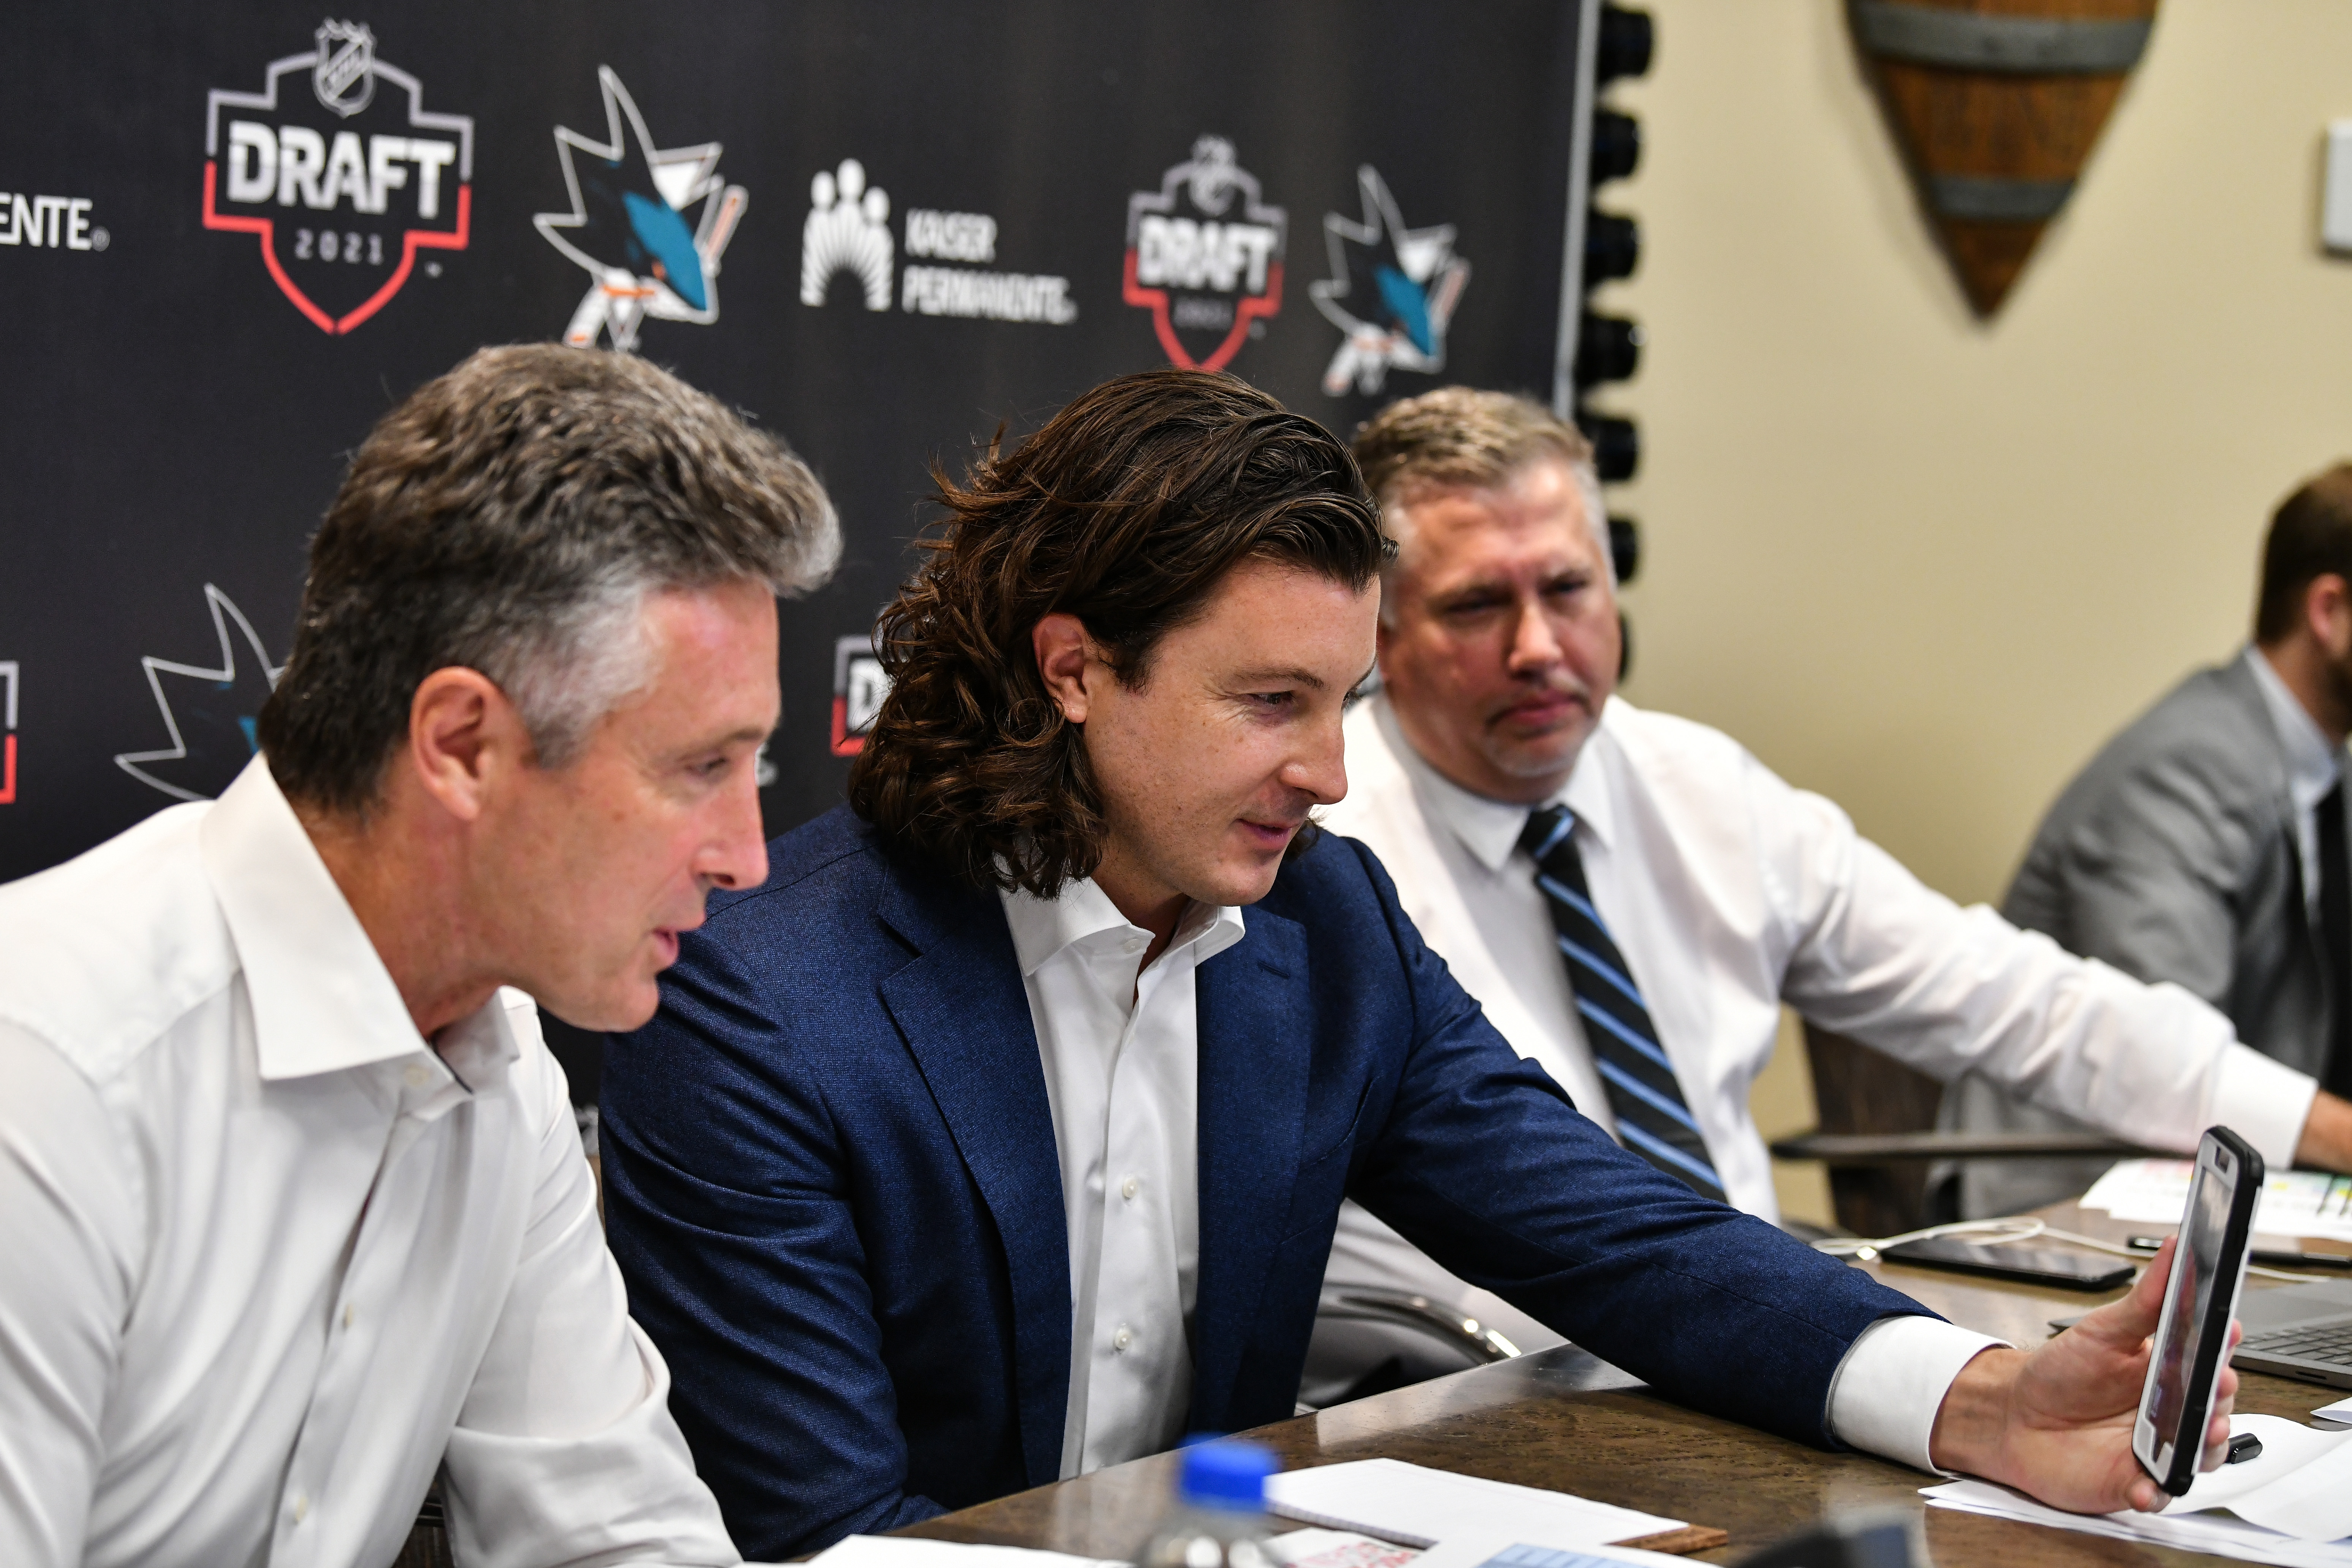 San Jose Sharks General Manager Doug Wilson and Director of Scouting Doug Wilson Jr. facetime William Eklund the seventh overall in the first round during the 2021 NHL Draft at SAP Center on July 23, 2021 in San Jose, California.